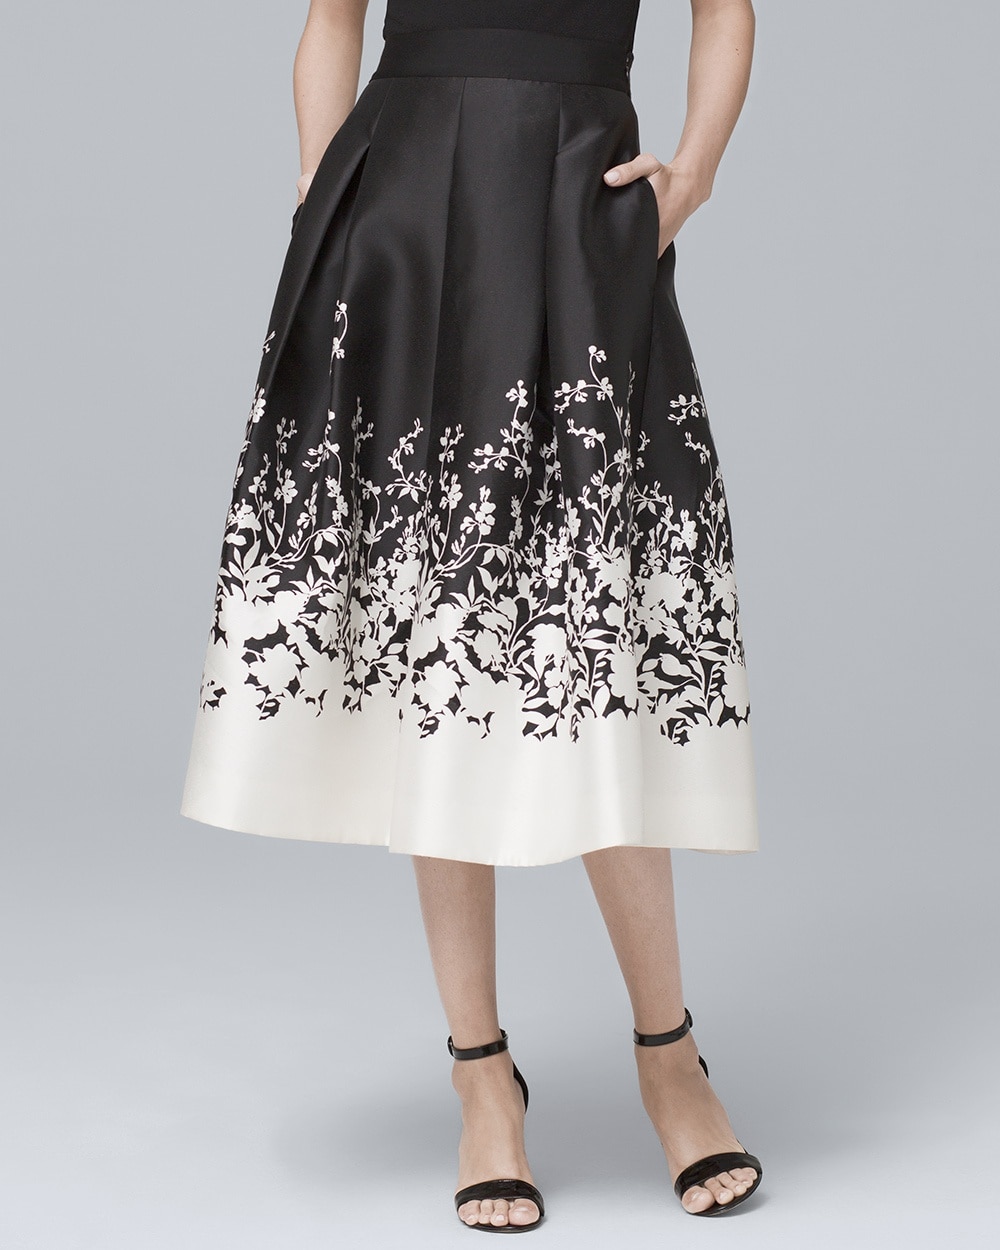 Floral-Print Satin Midi Skirt video preview image, click to start video